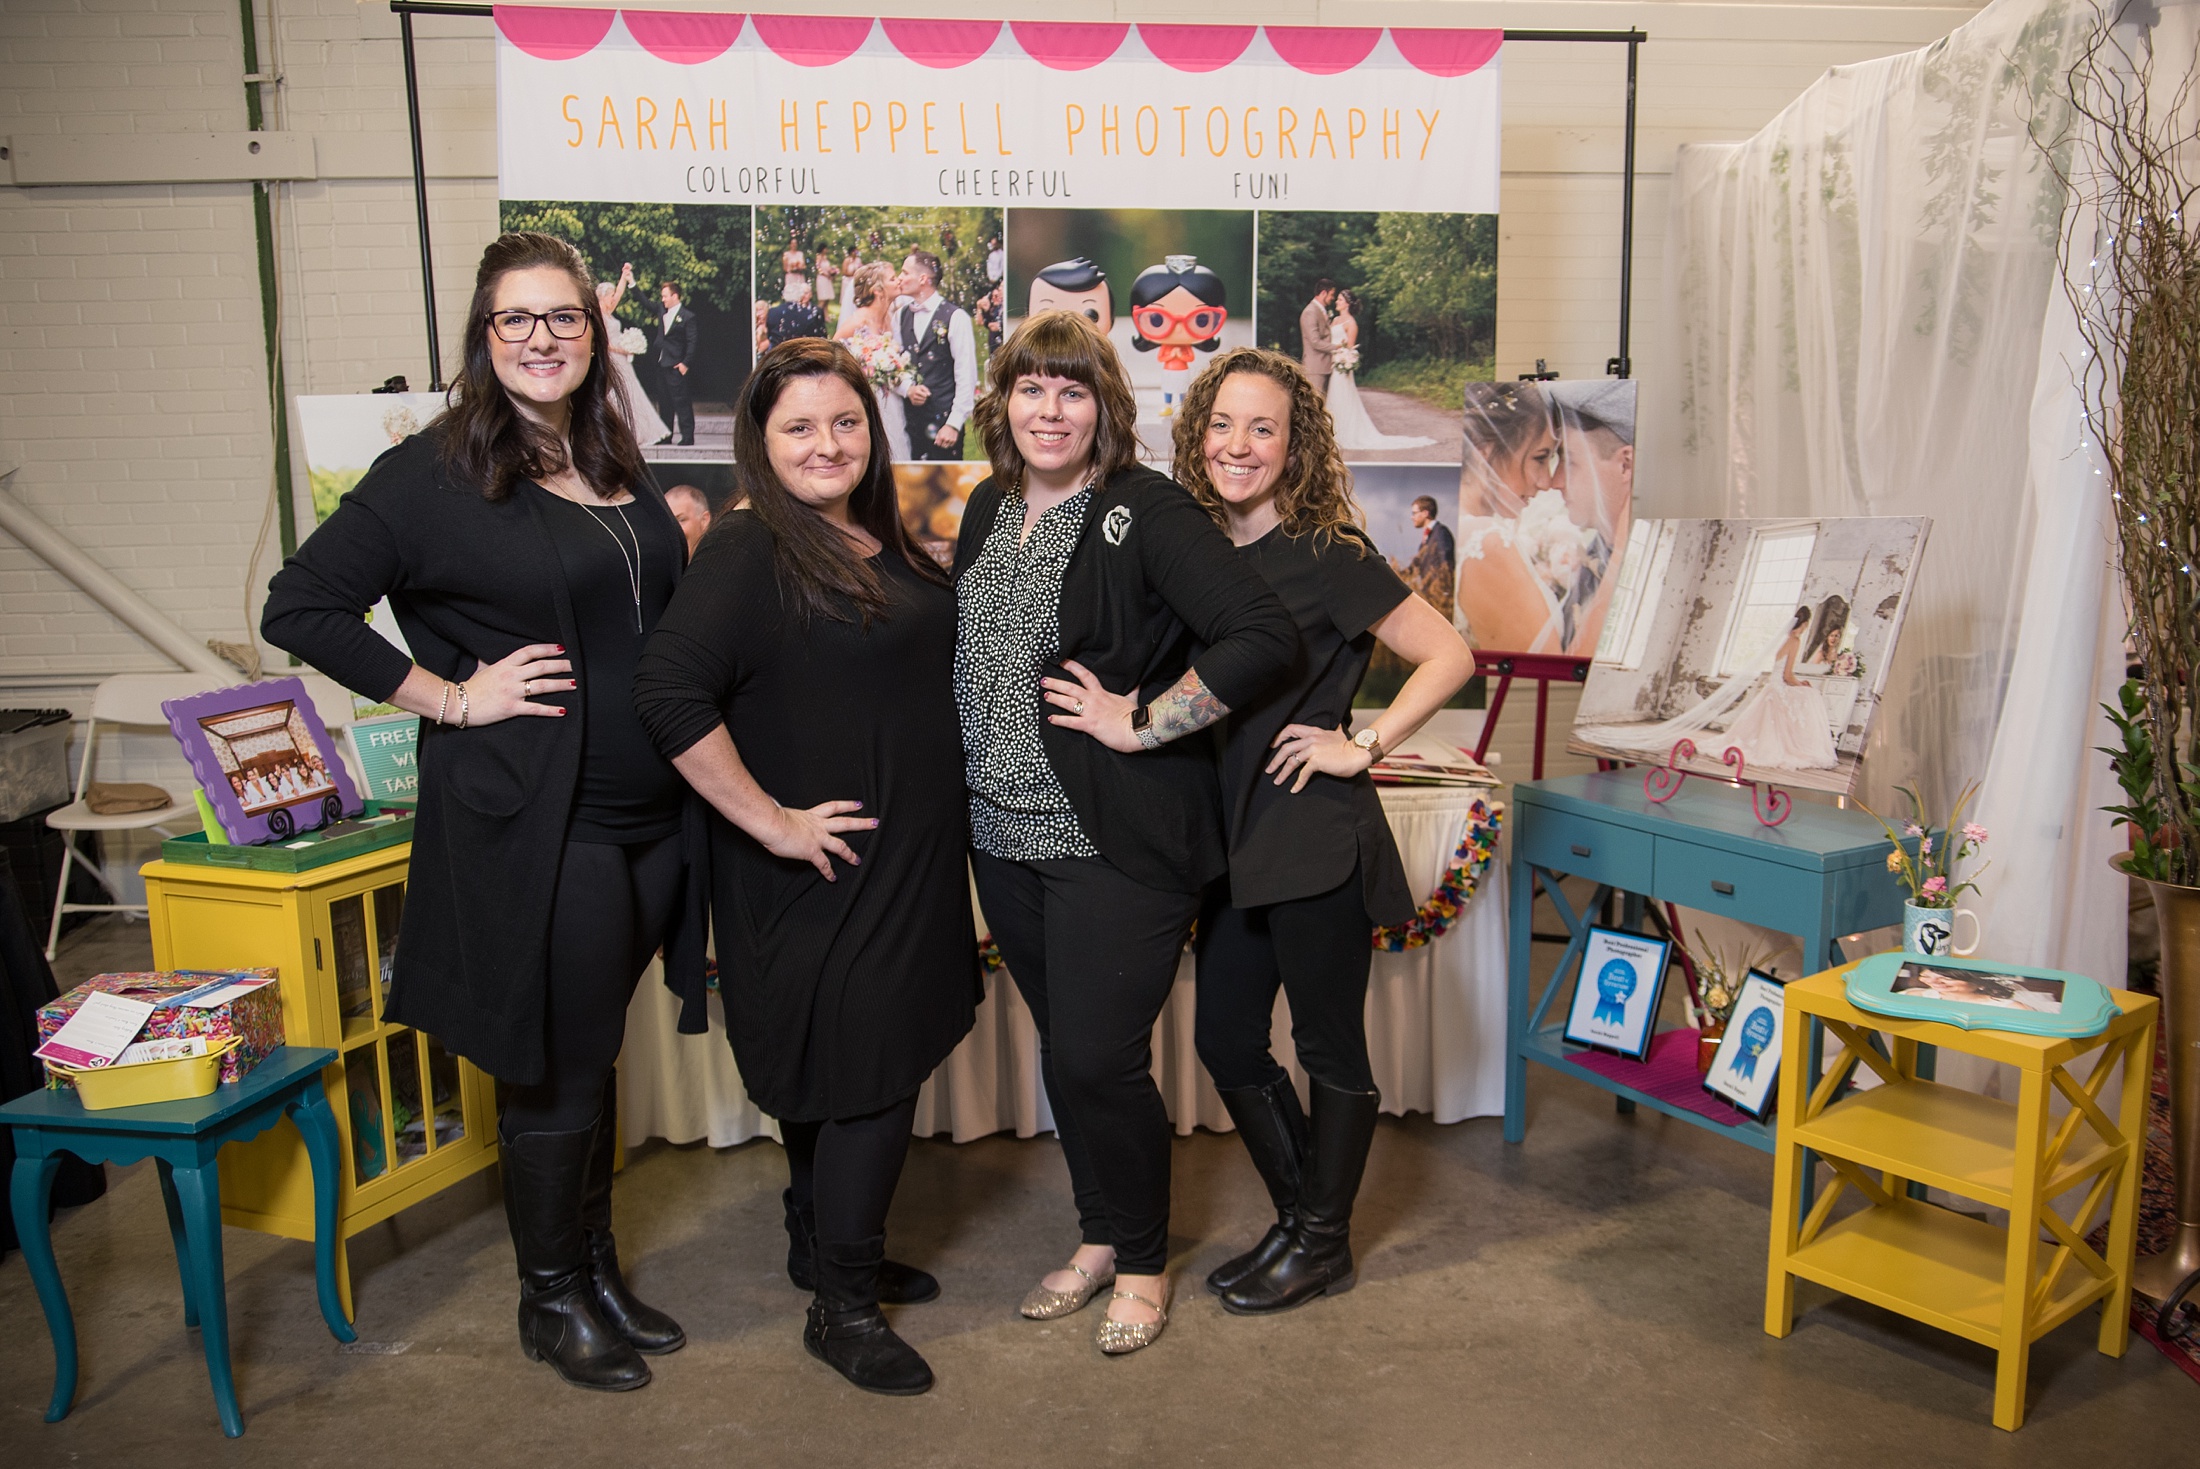 sarah heppell and her helpers at the bridal show in syracuse, ny